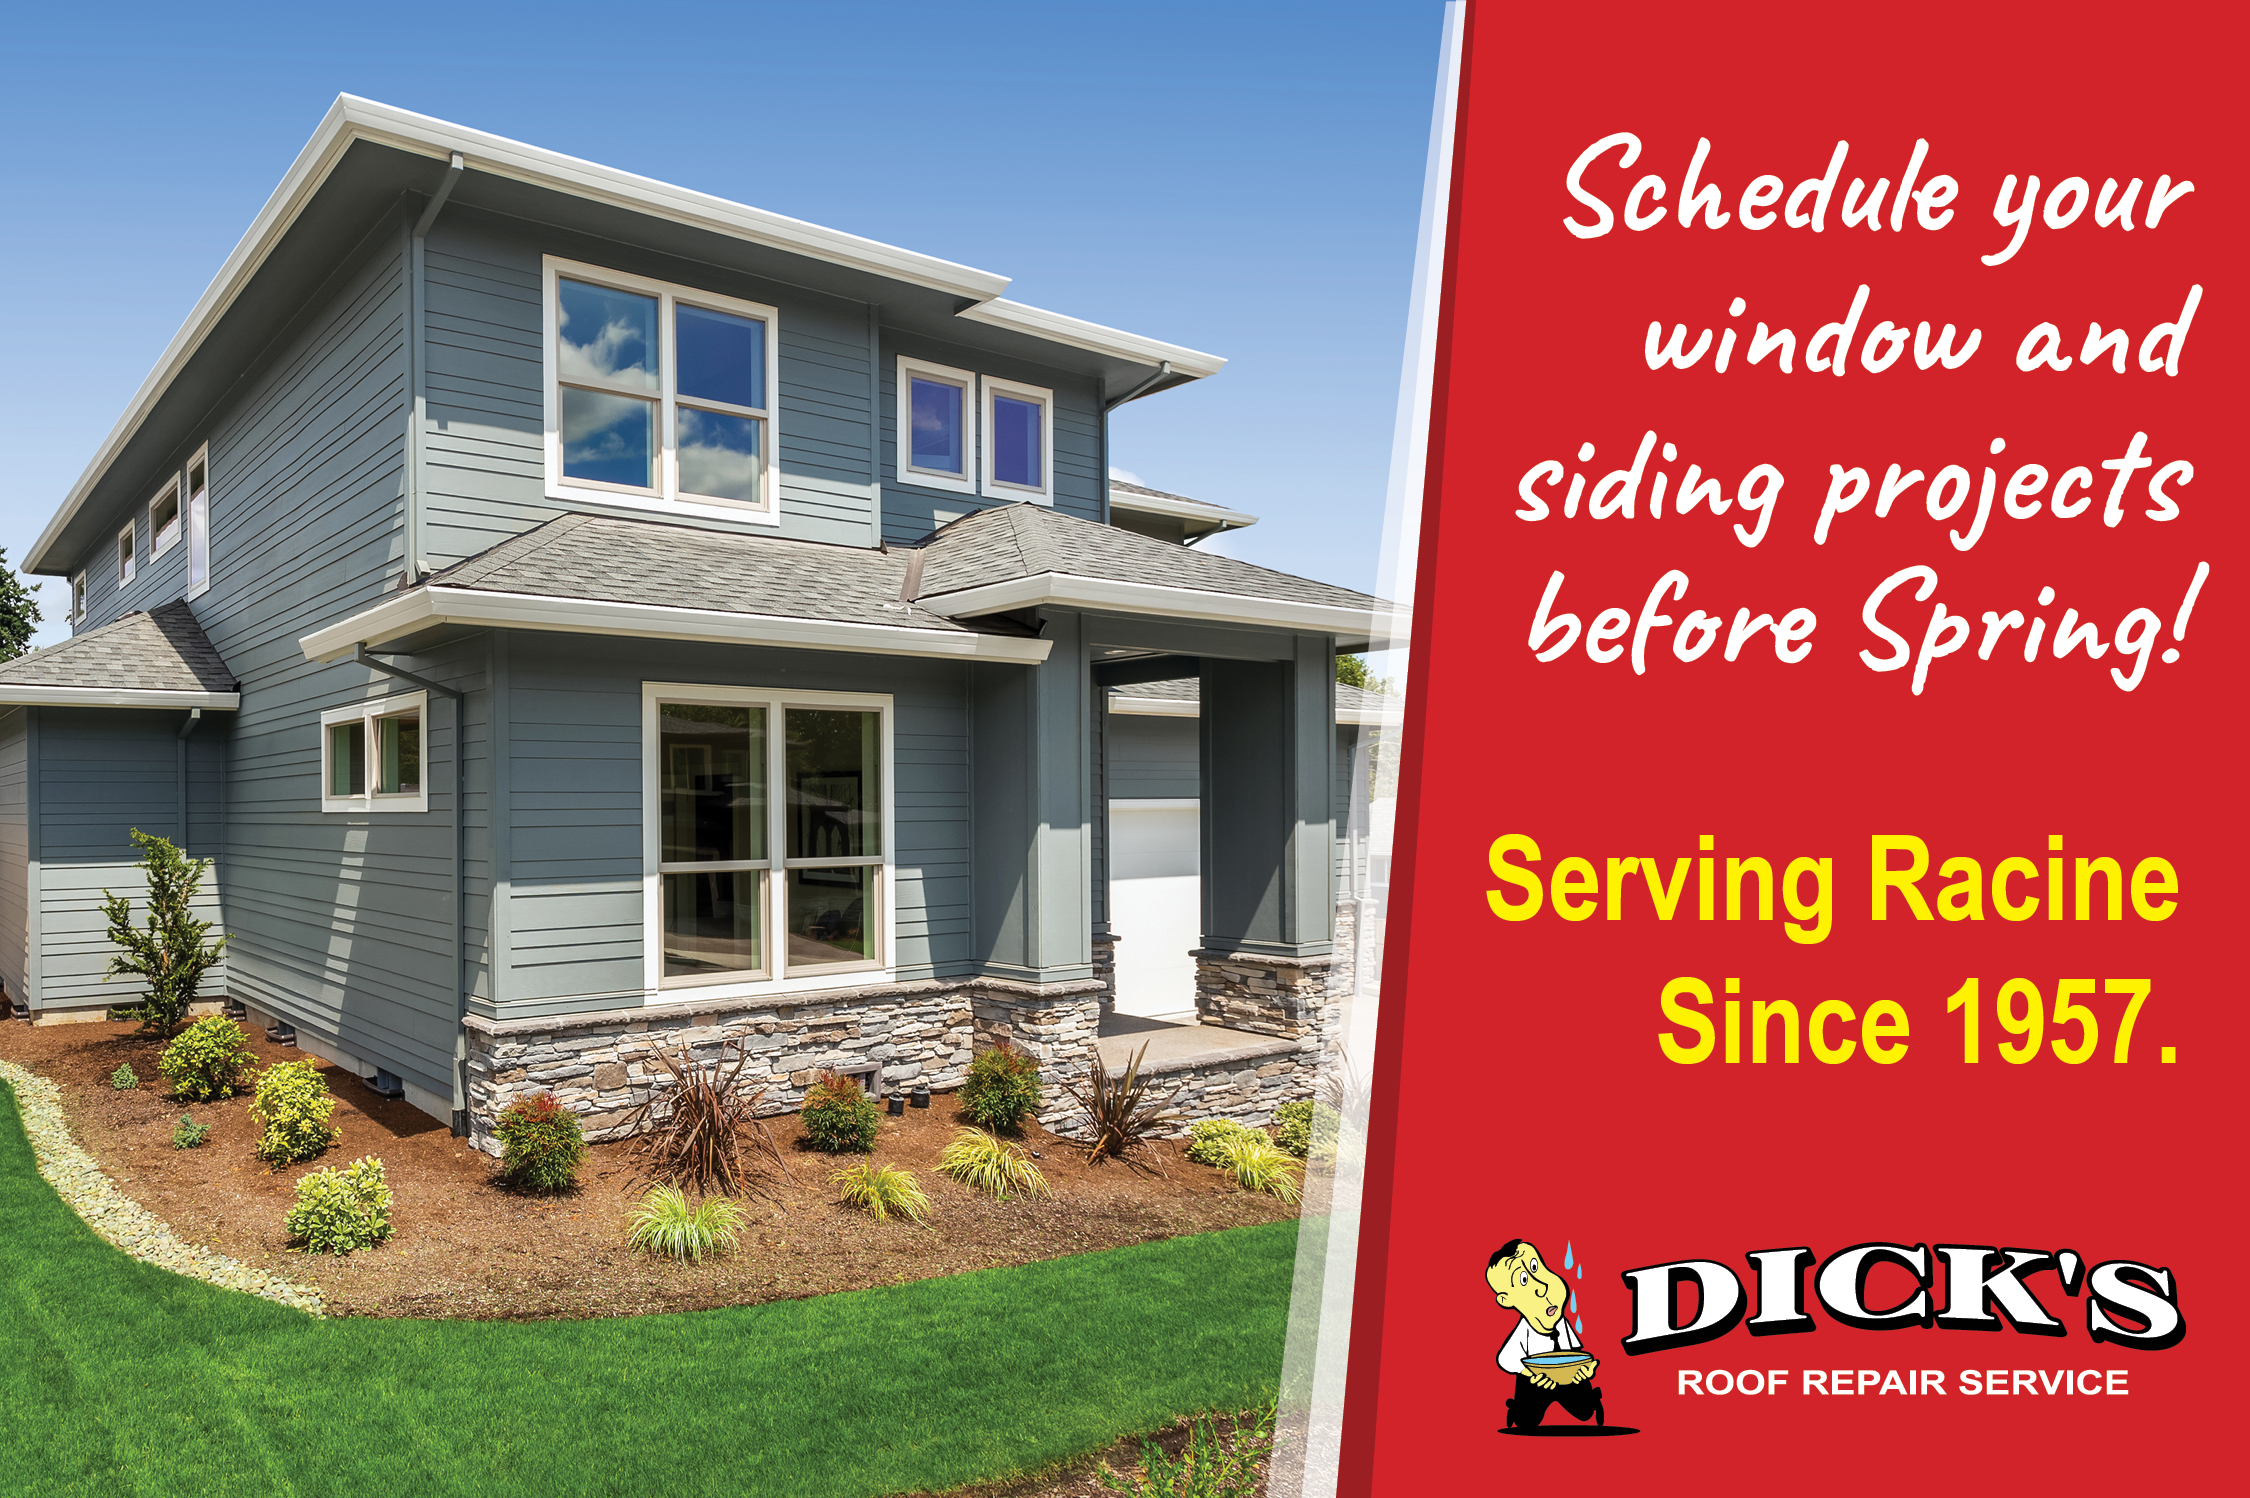 Racine Homes, Schedule for New Windows, Siding